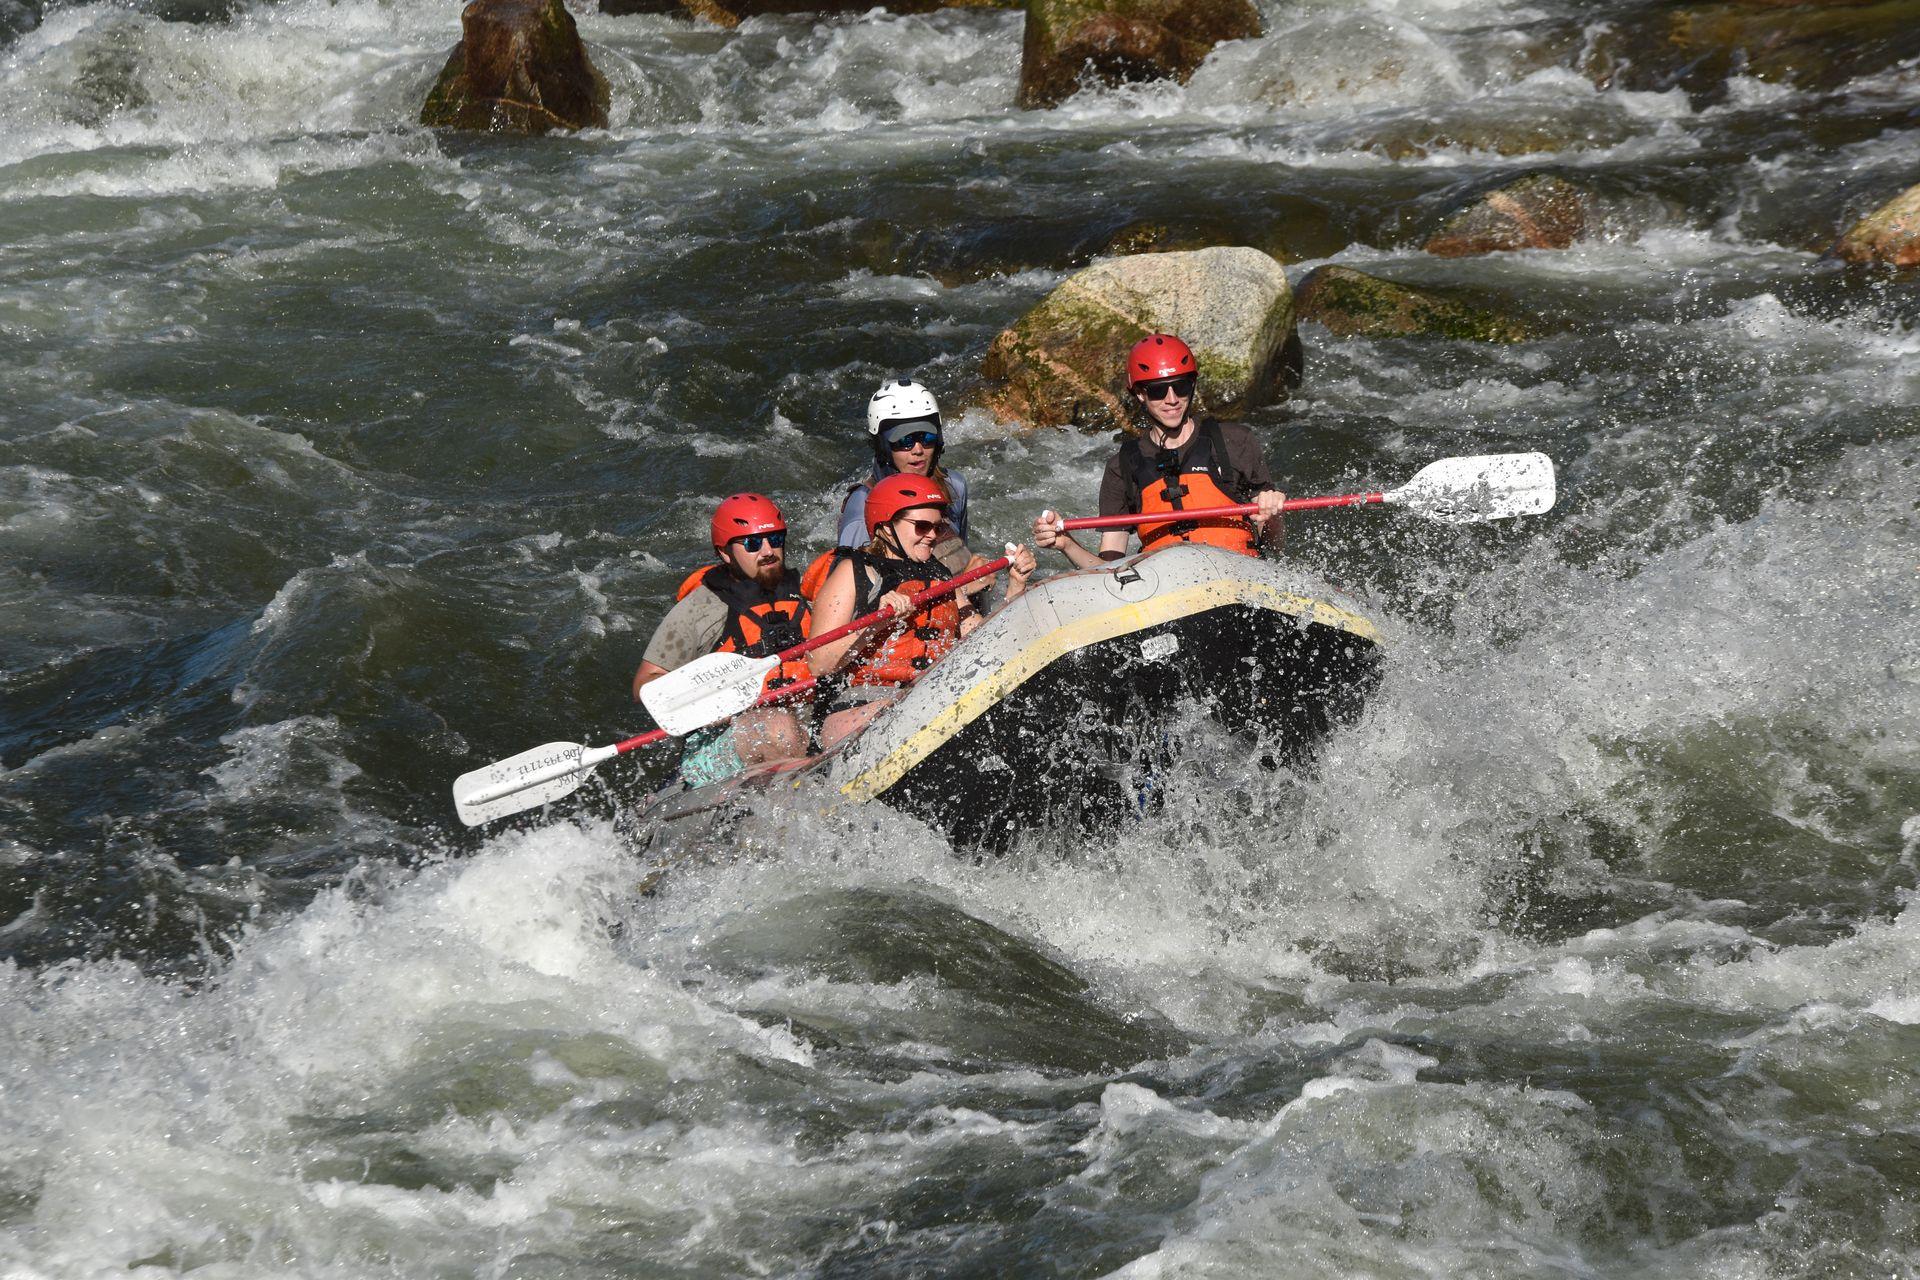 Lydia and 3 others white water rafting on the Payette River in Idaho.